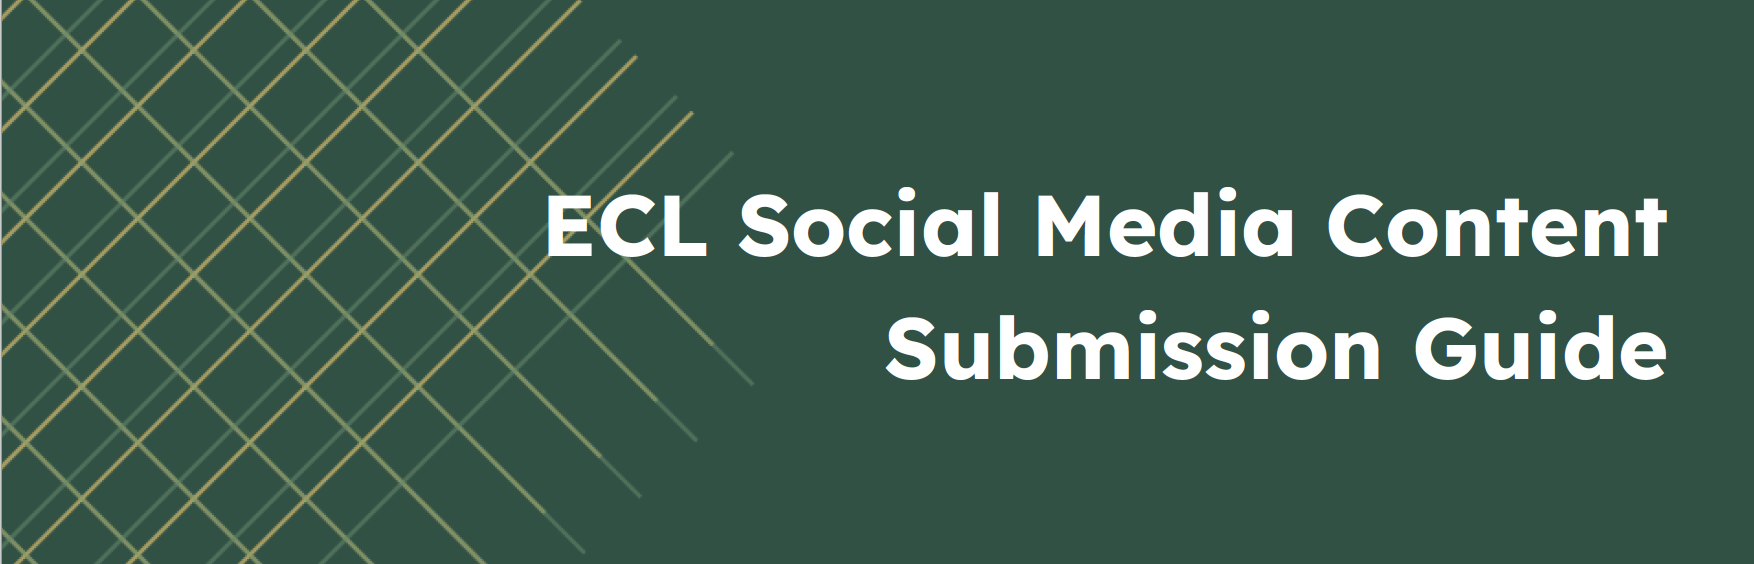 ECL Social Media Content Submission Guide